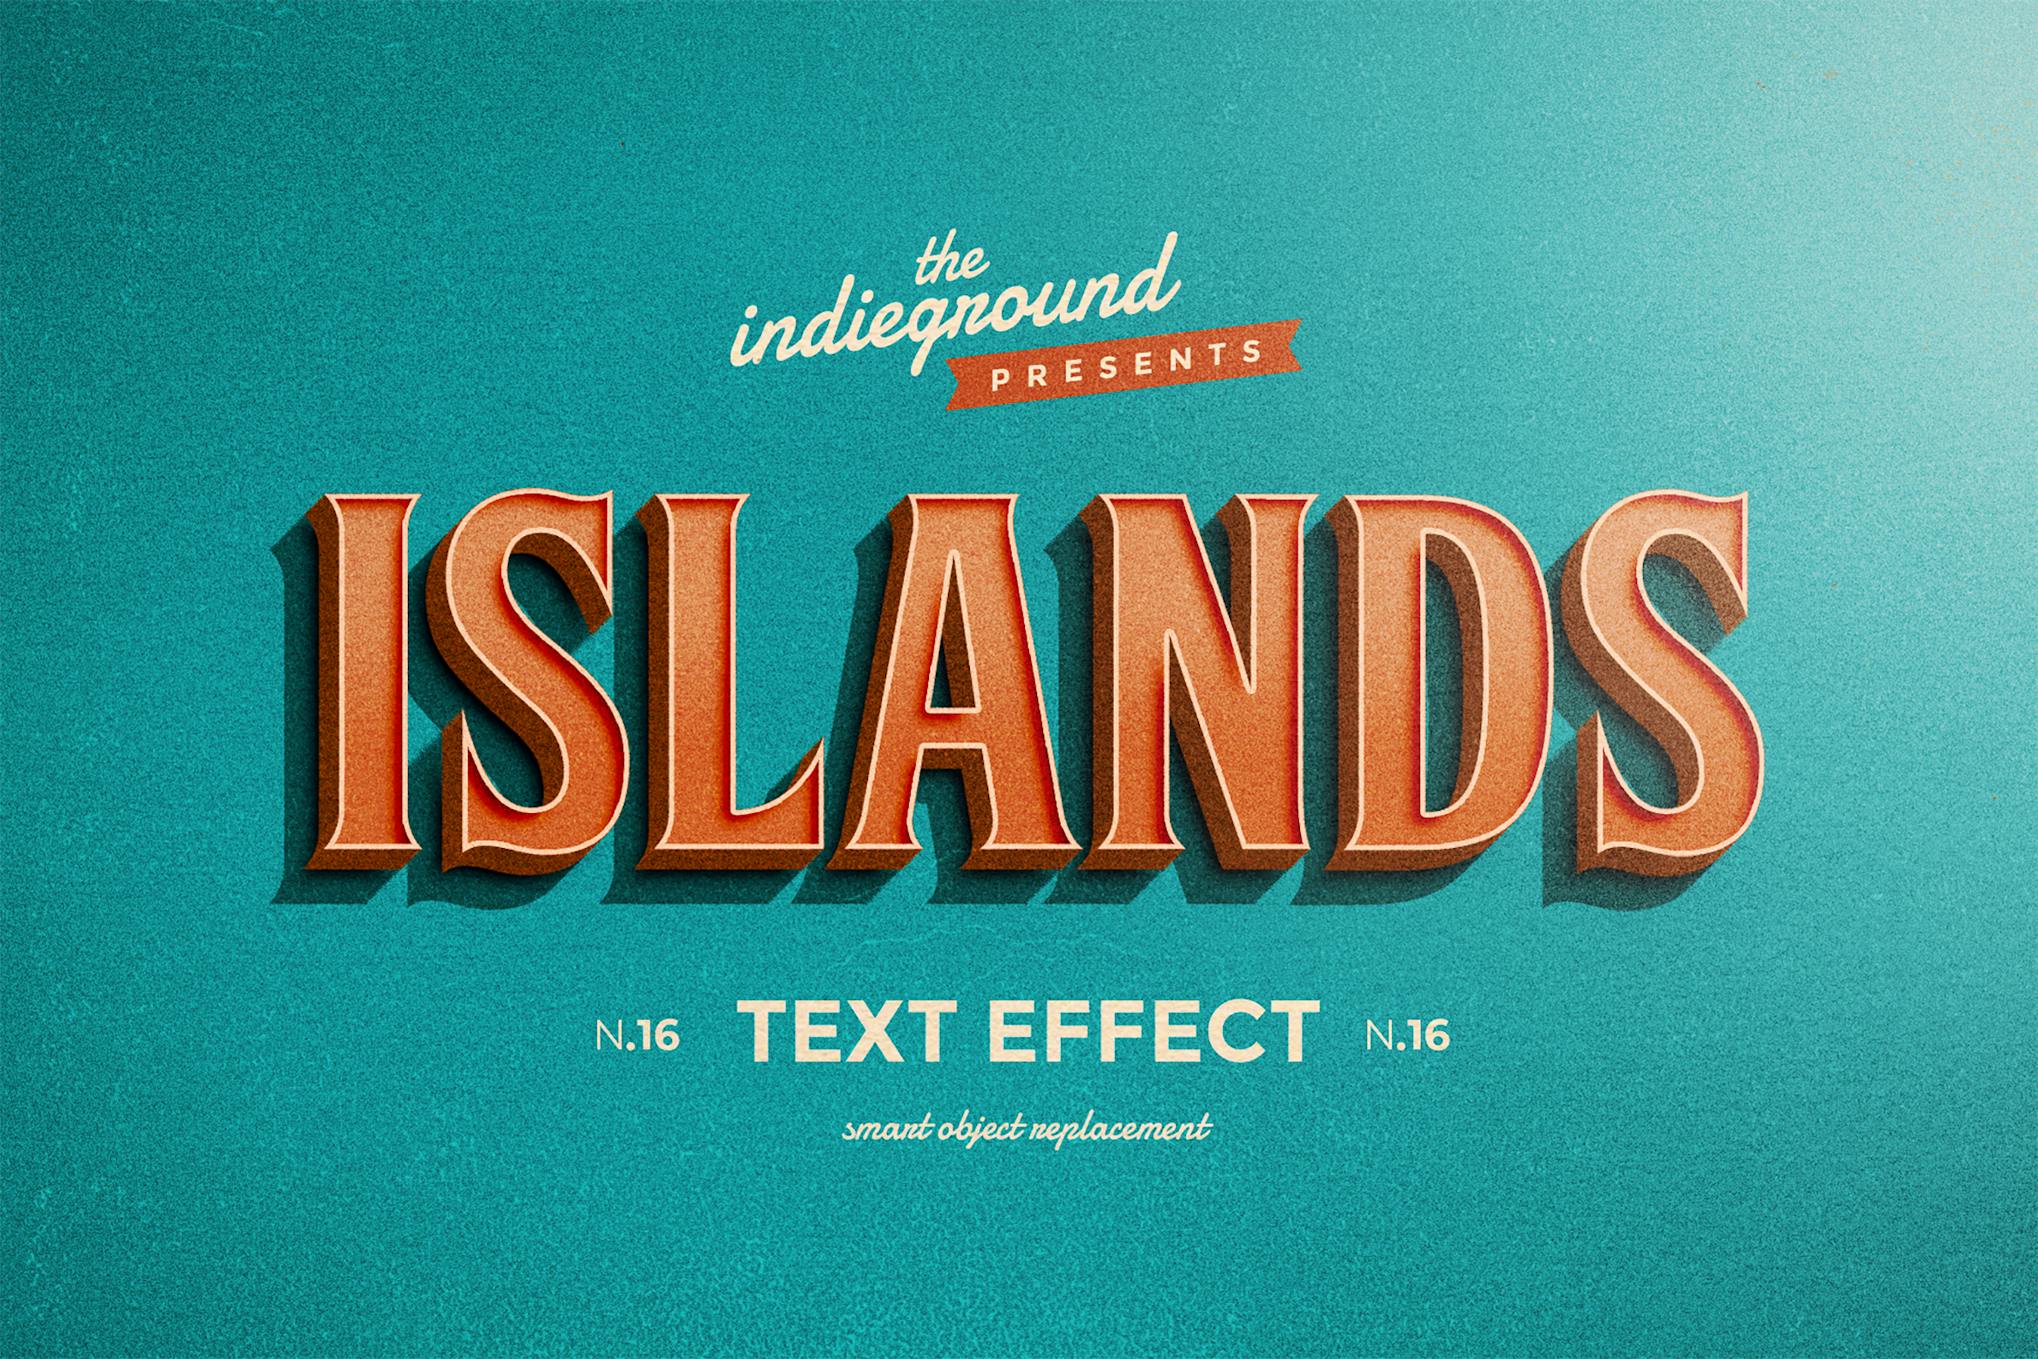 Classic Vintage Text Effect for Photoshop